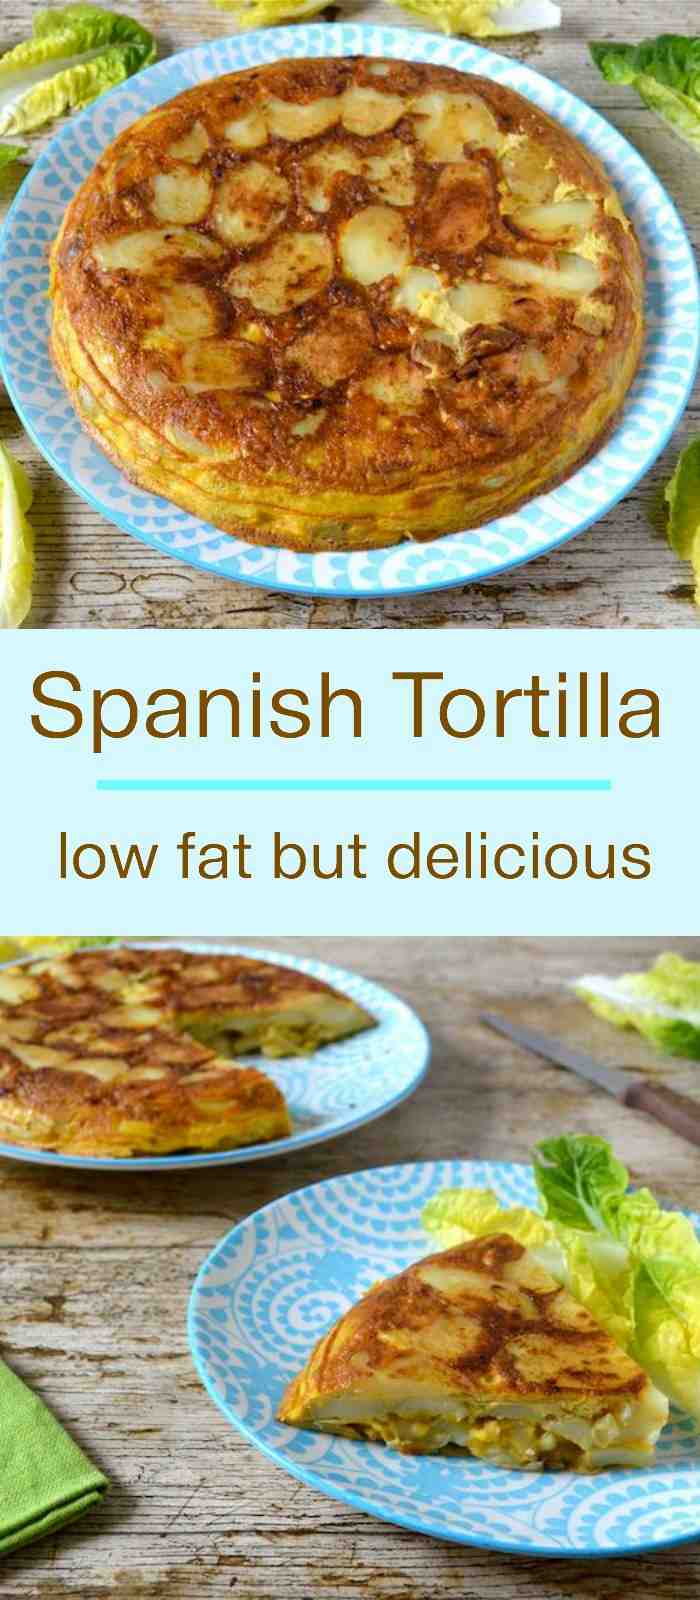 Easy Spanish Tortilla recipe. Delicious but with only half the fat.